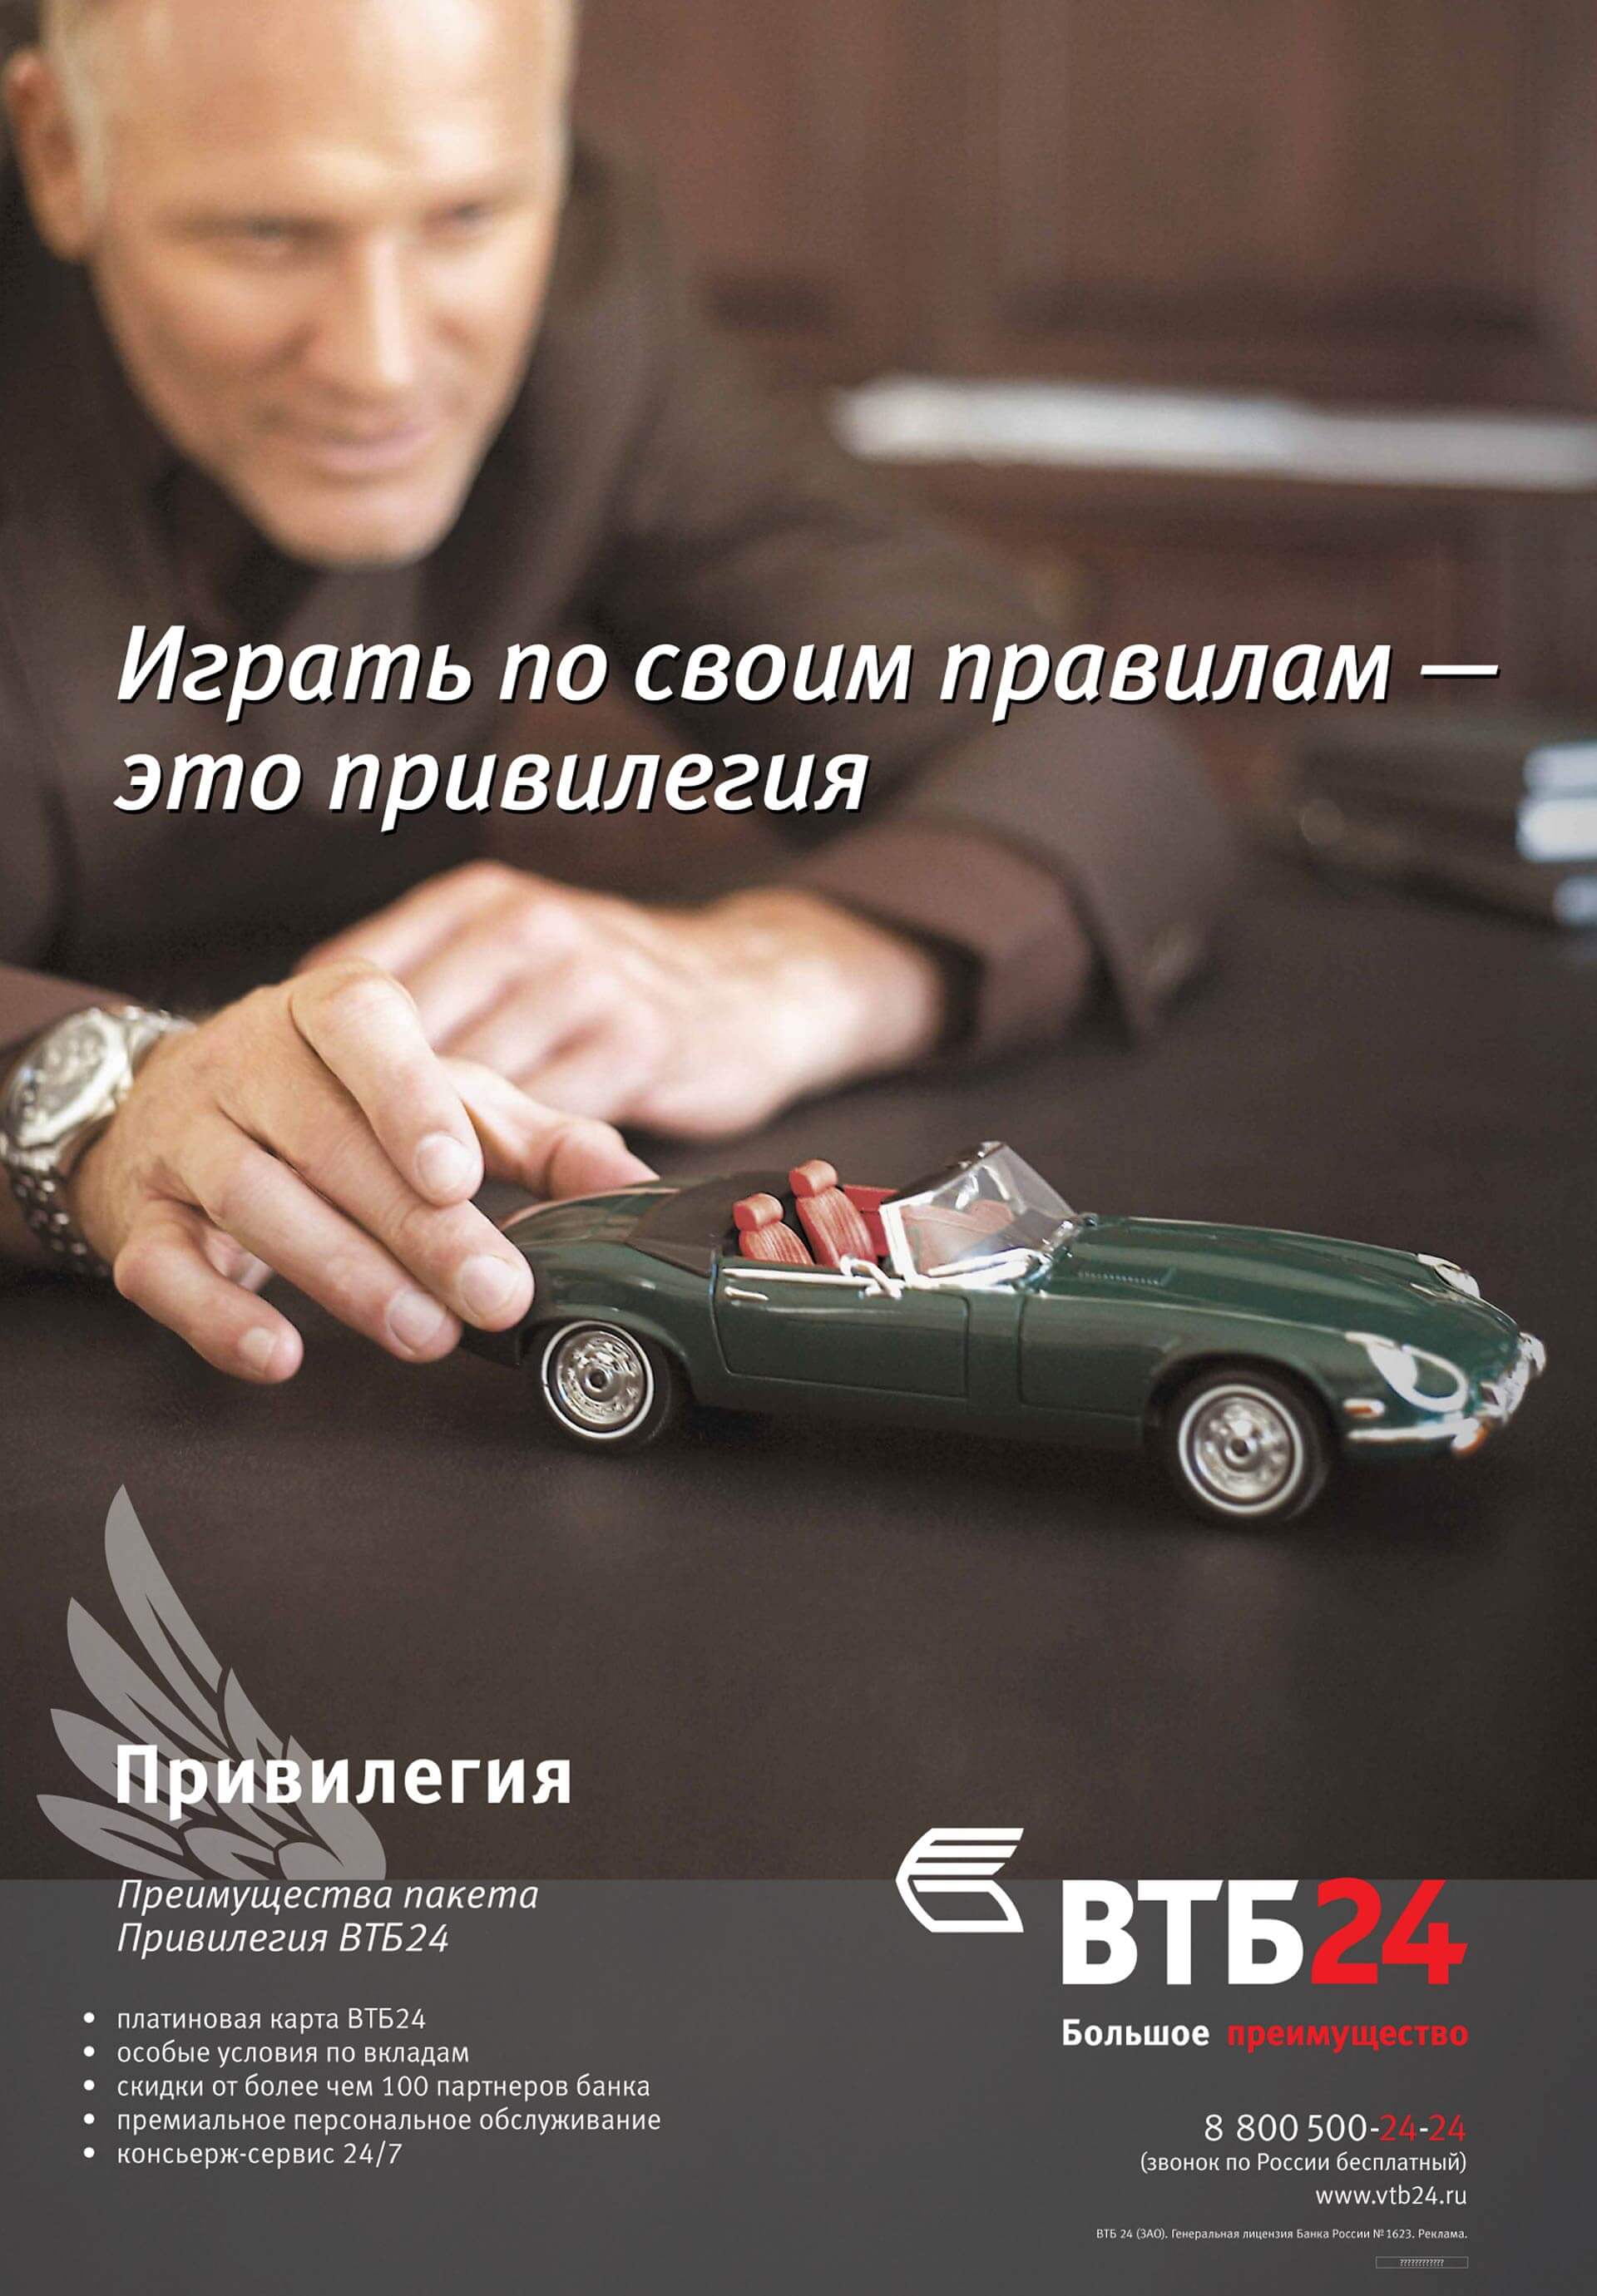 VTB24 Privilege card lifestyle marketing material for high-net-worth customers in Russia